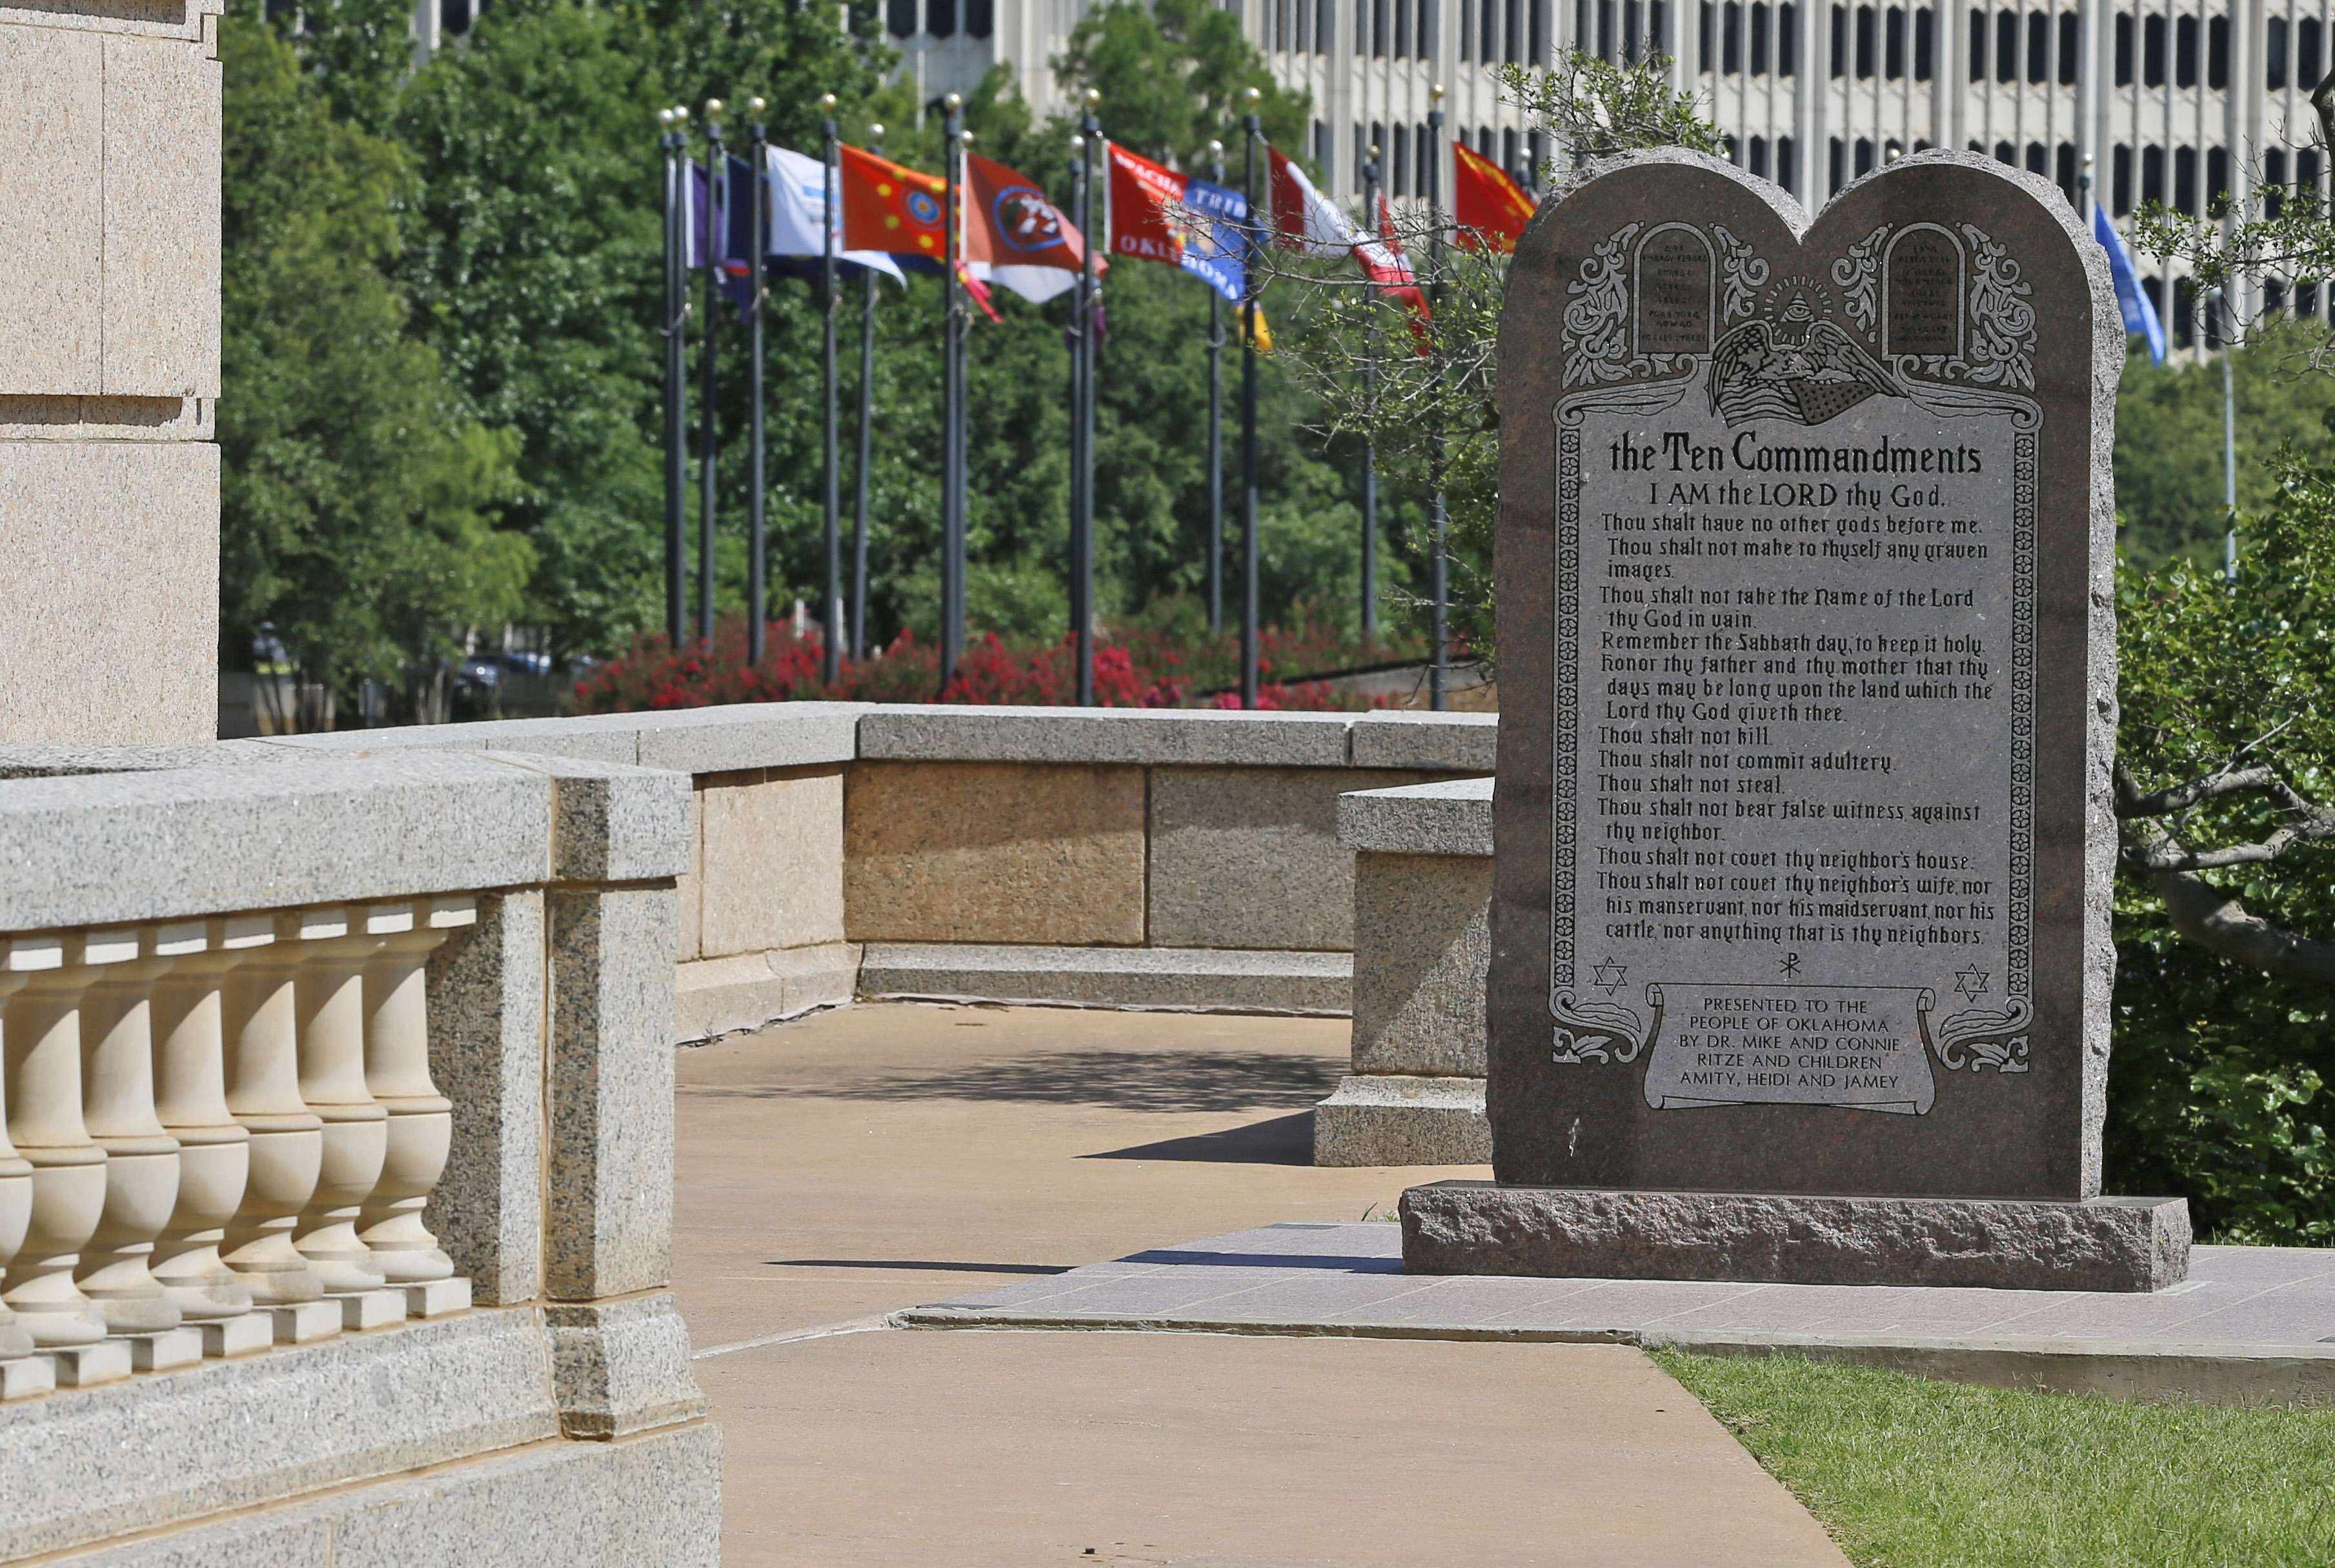 The Ten Commandments monument is pictured at the state Capitol in Oklahoma City, Tuesday, June 30, 2015. Oklahoma’s Supreme Court says the monument must be removed because it indirectly benefits the Jewish and Christian faiths in violation of the state constitution. (AP Photo/Sue Ogrocki)